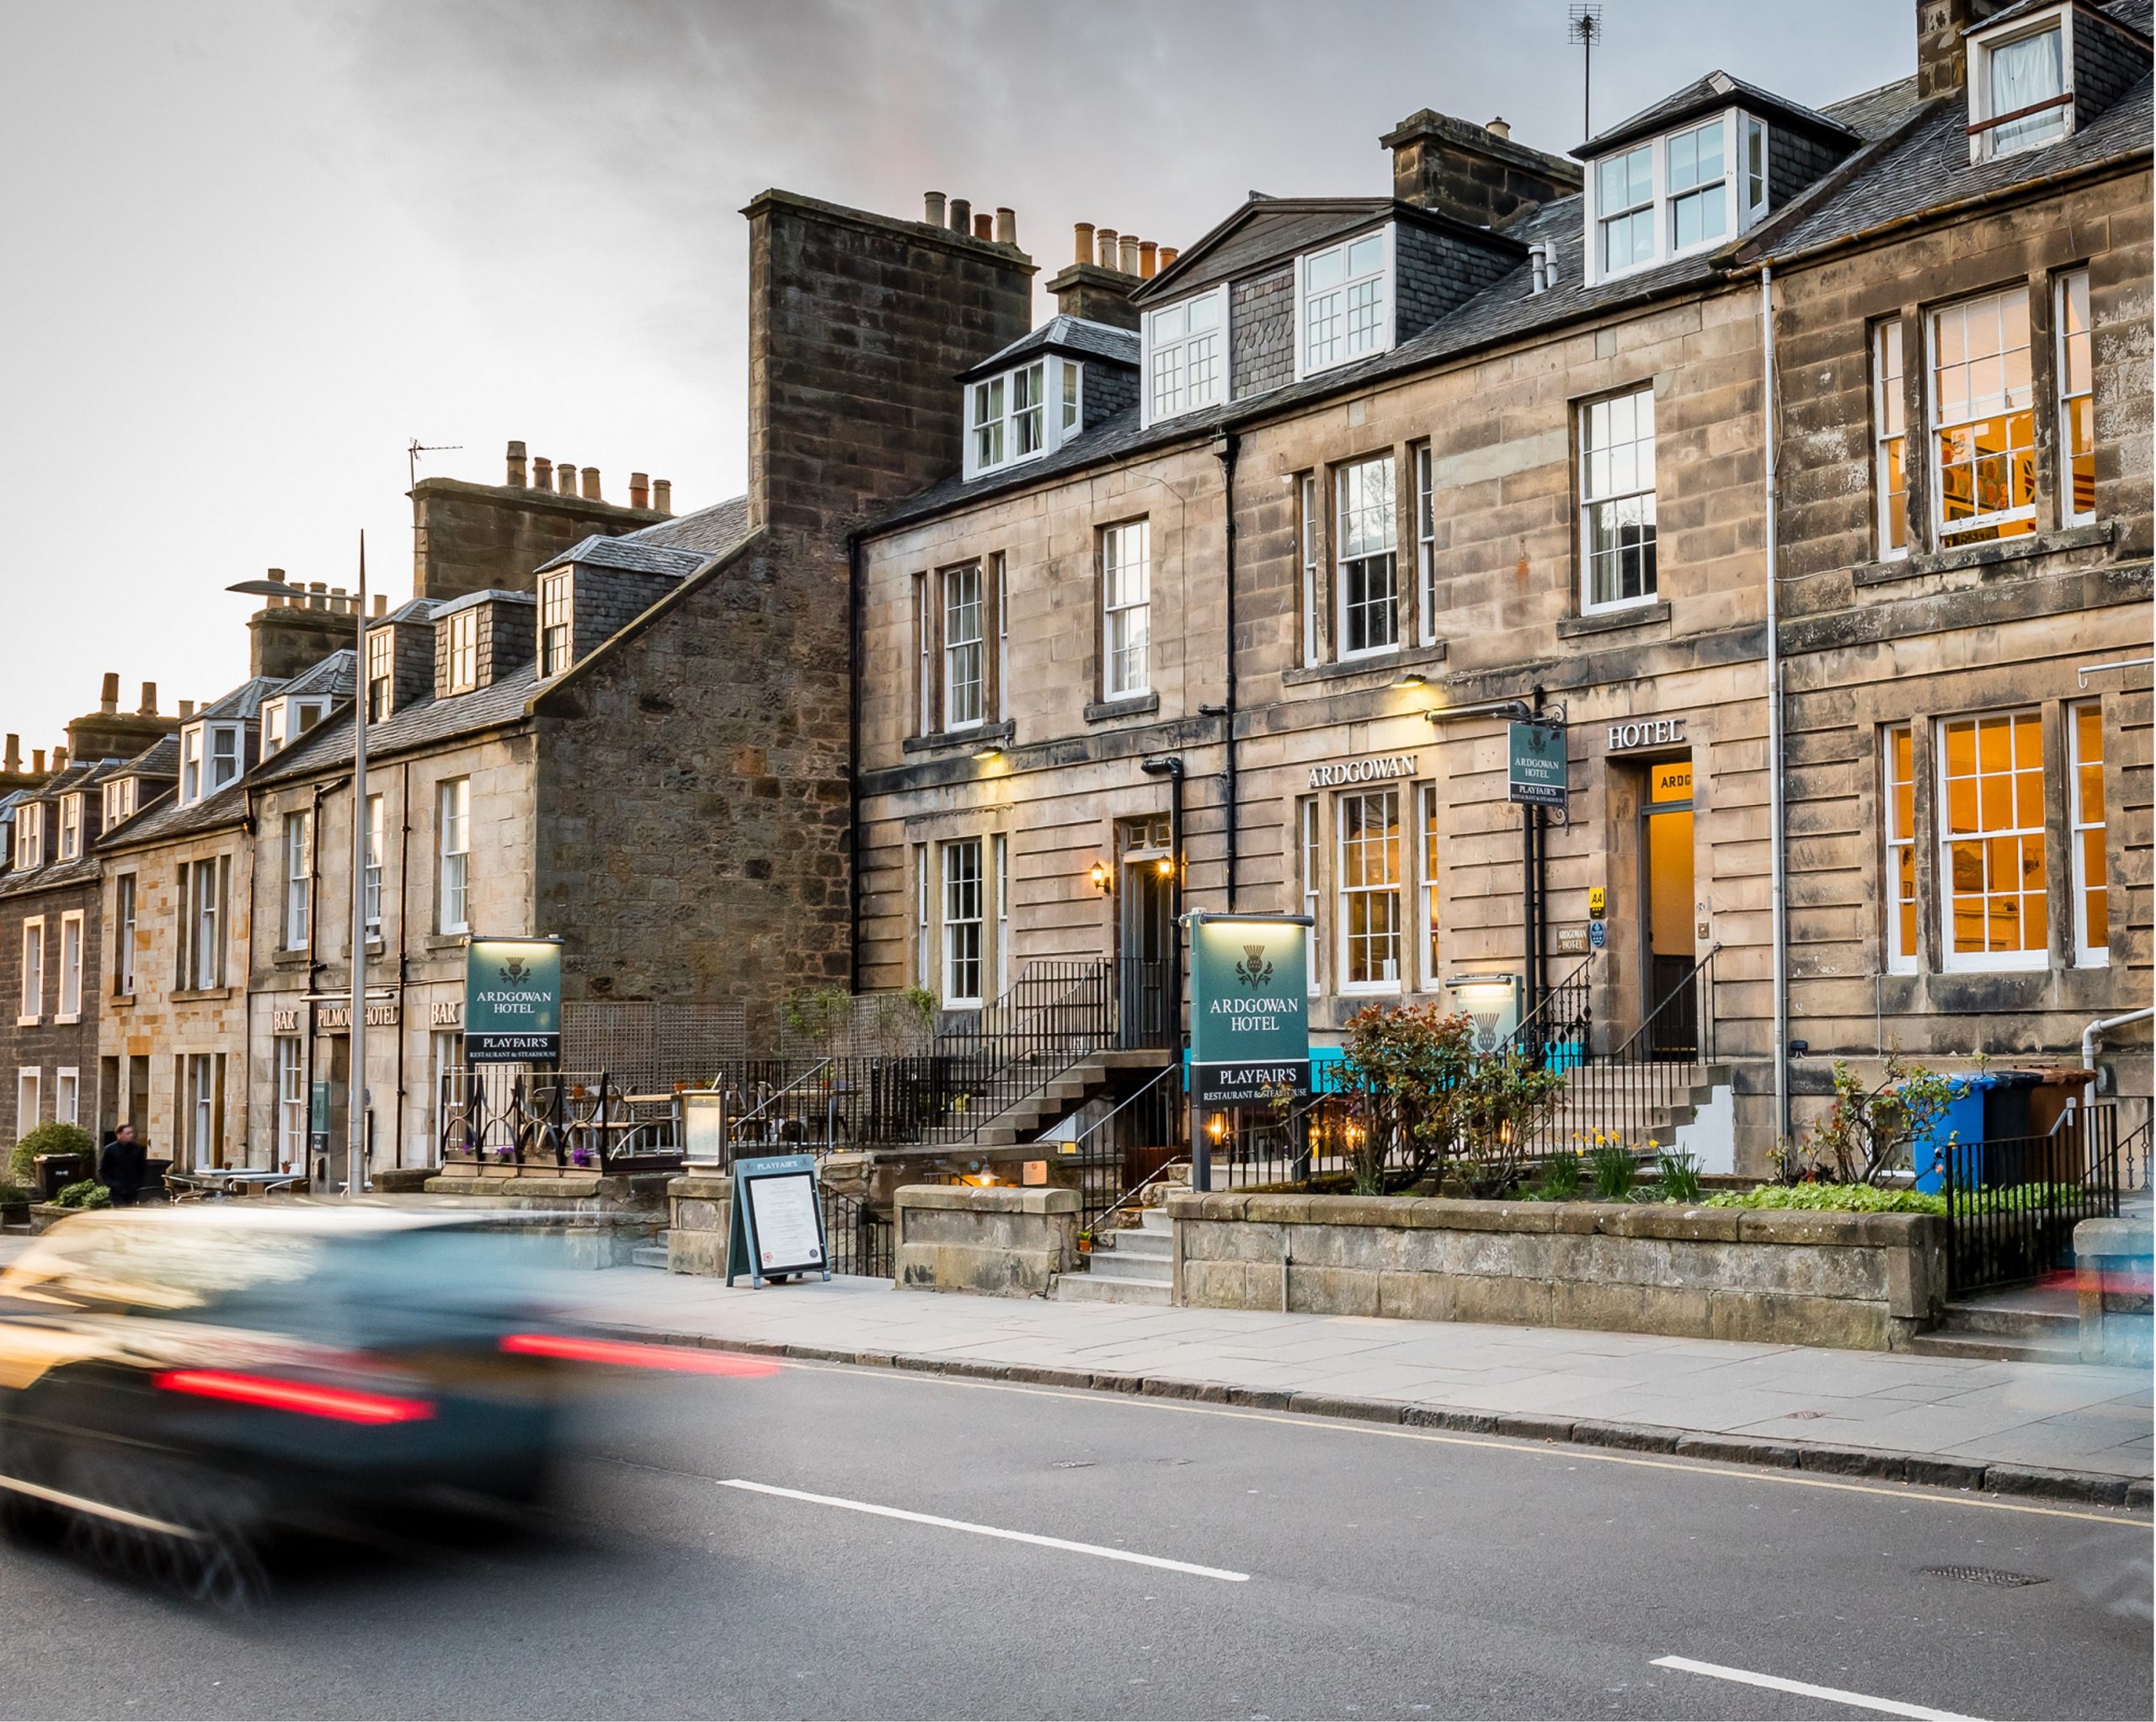 NI’s Wirefox investment company acquires St Andrews hotel